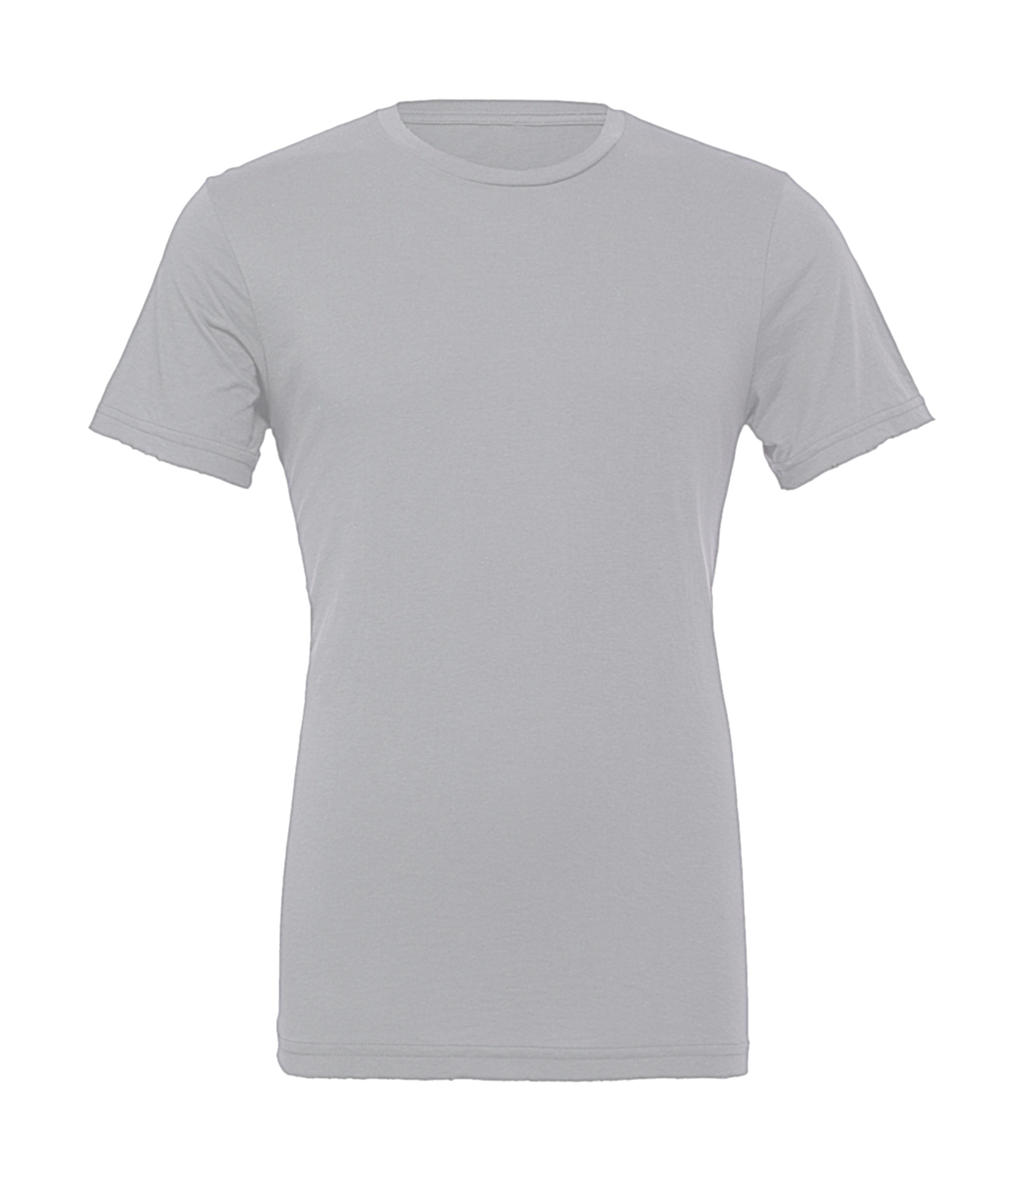  Unisex Jersey Short Sleeve Tee in Farbe Ash